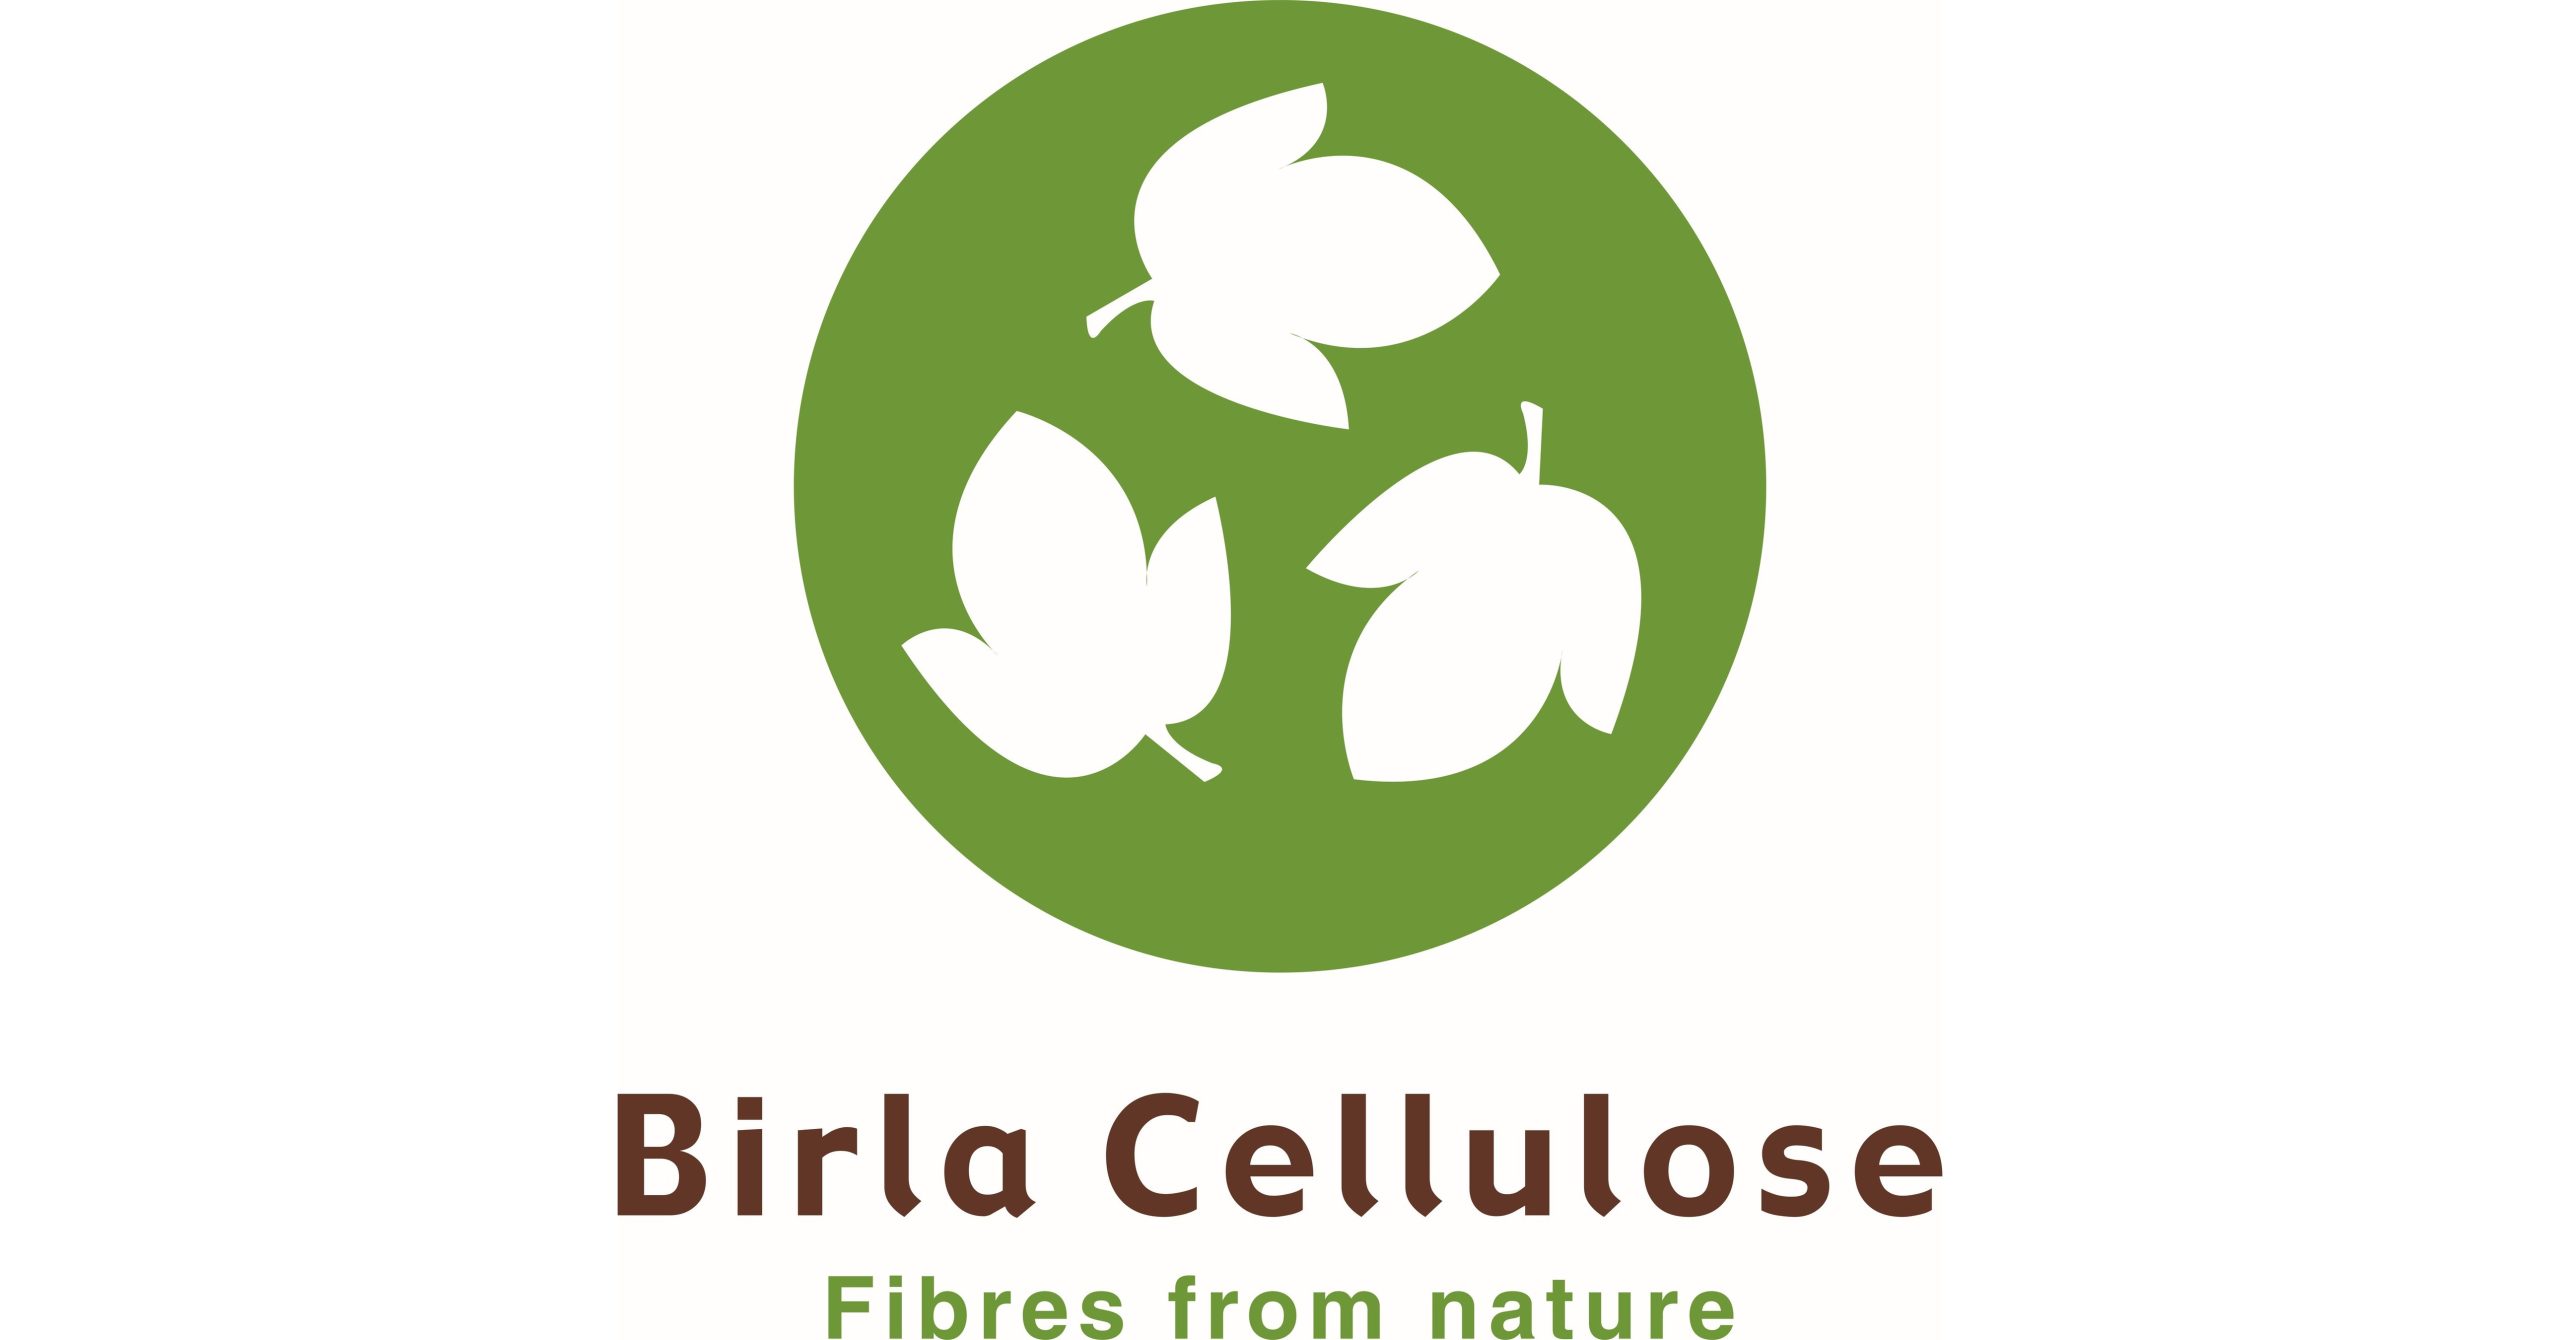 Birla Cellulose completes pilot spin of lyocell fibres containing Nullarbor-20